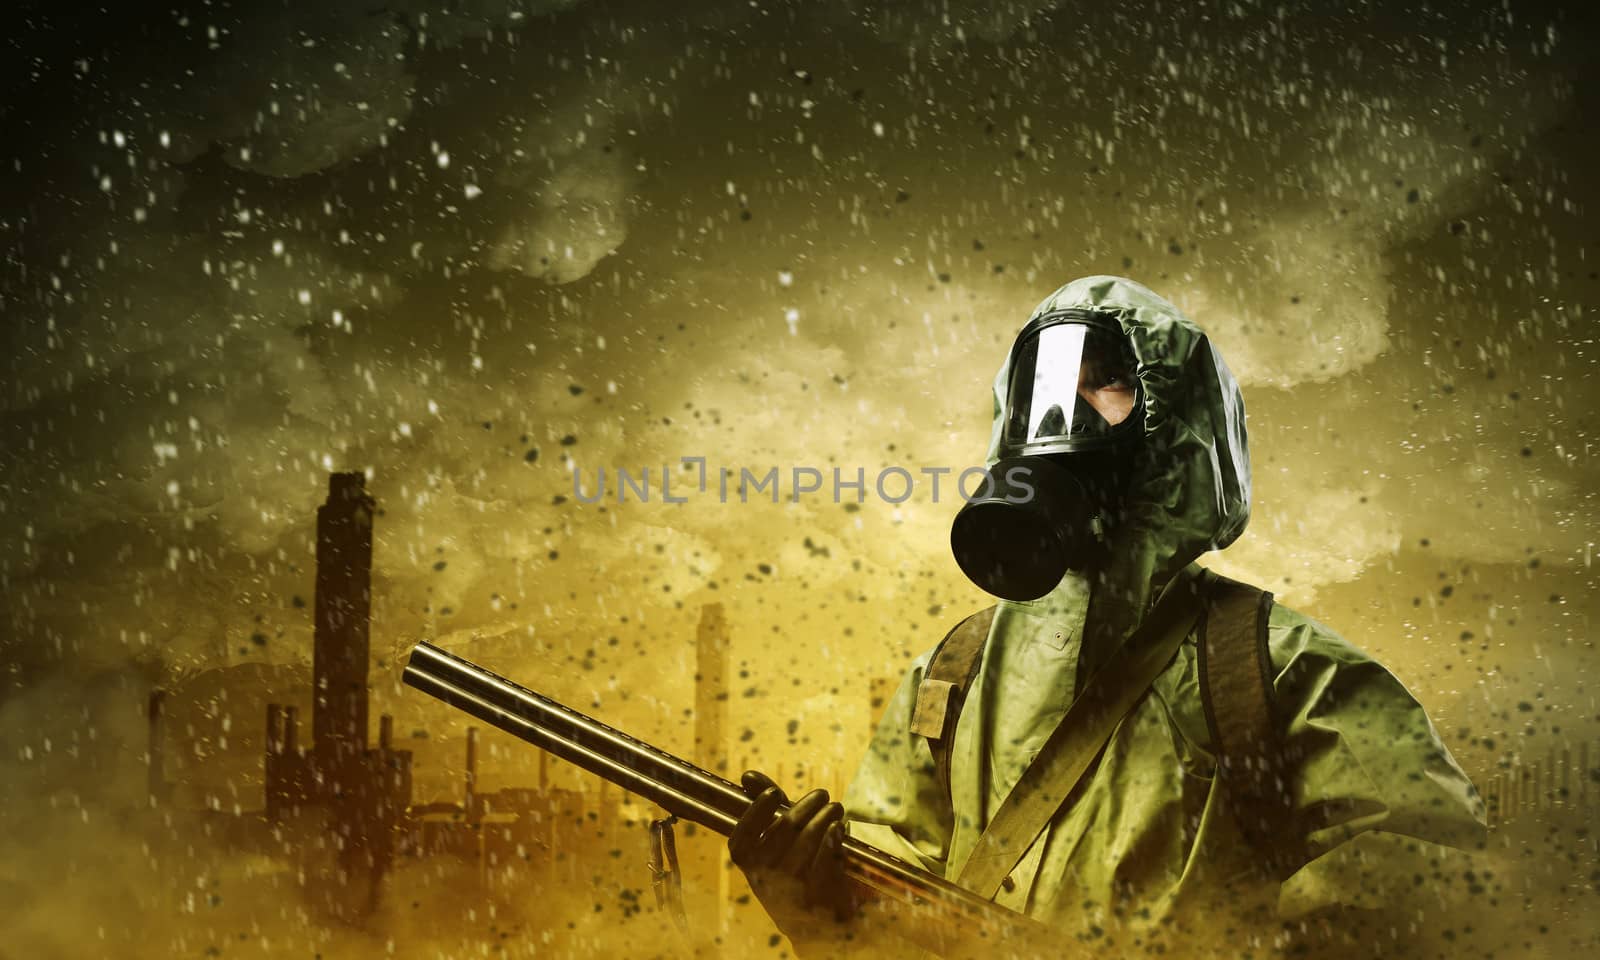 Man in gas mask and camouflage holding gun. Disaster concept